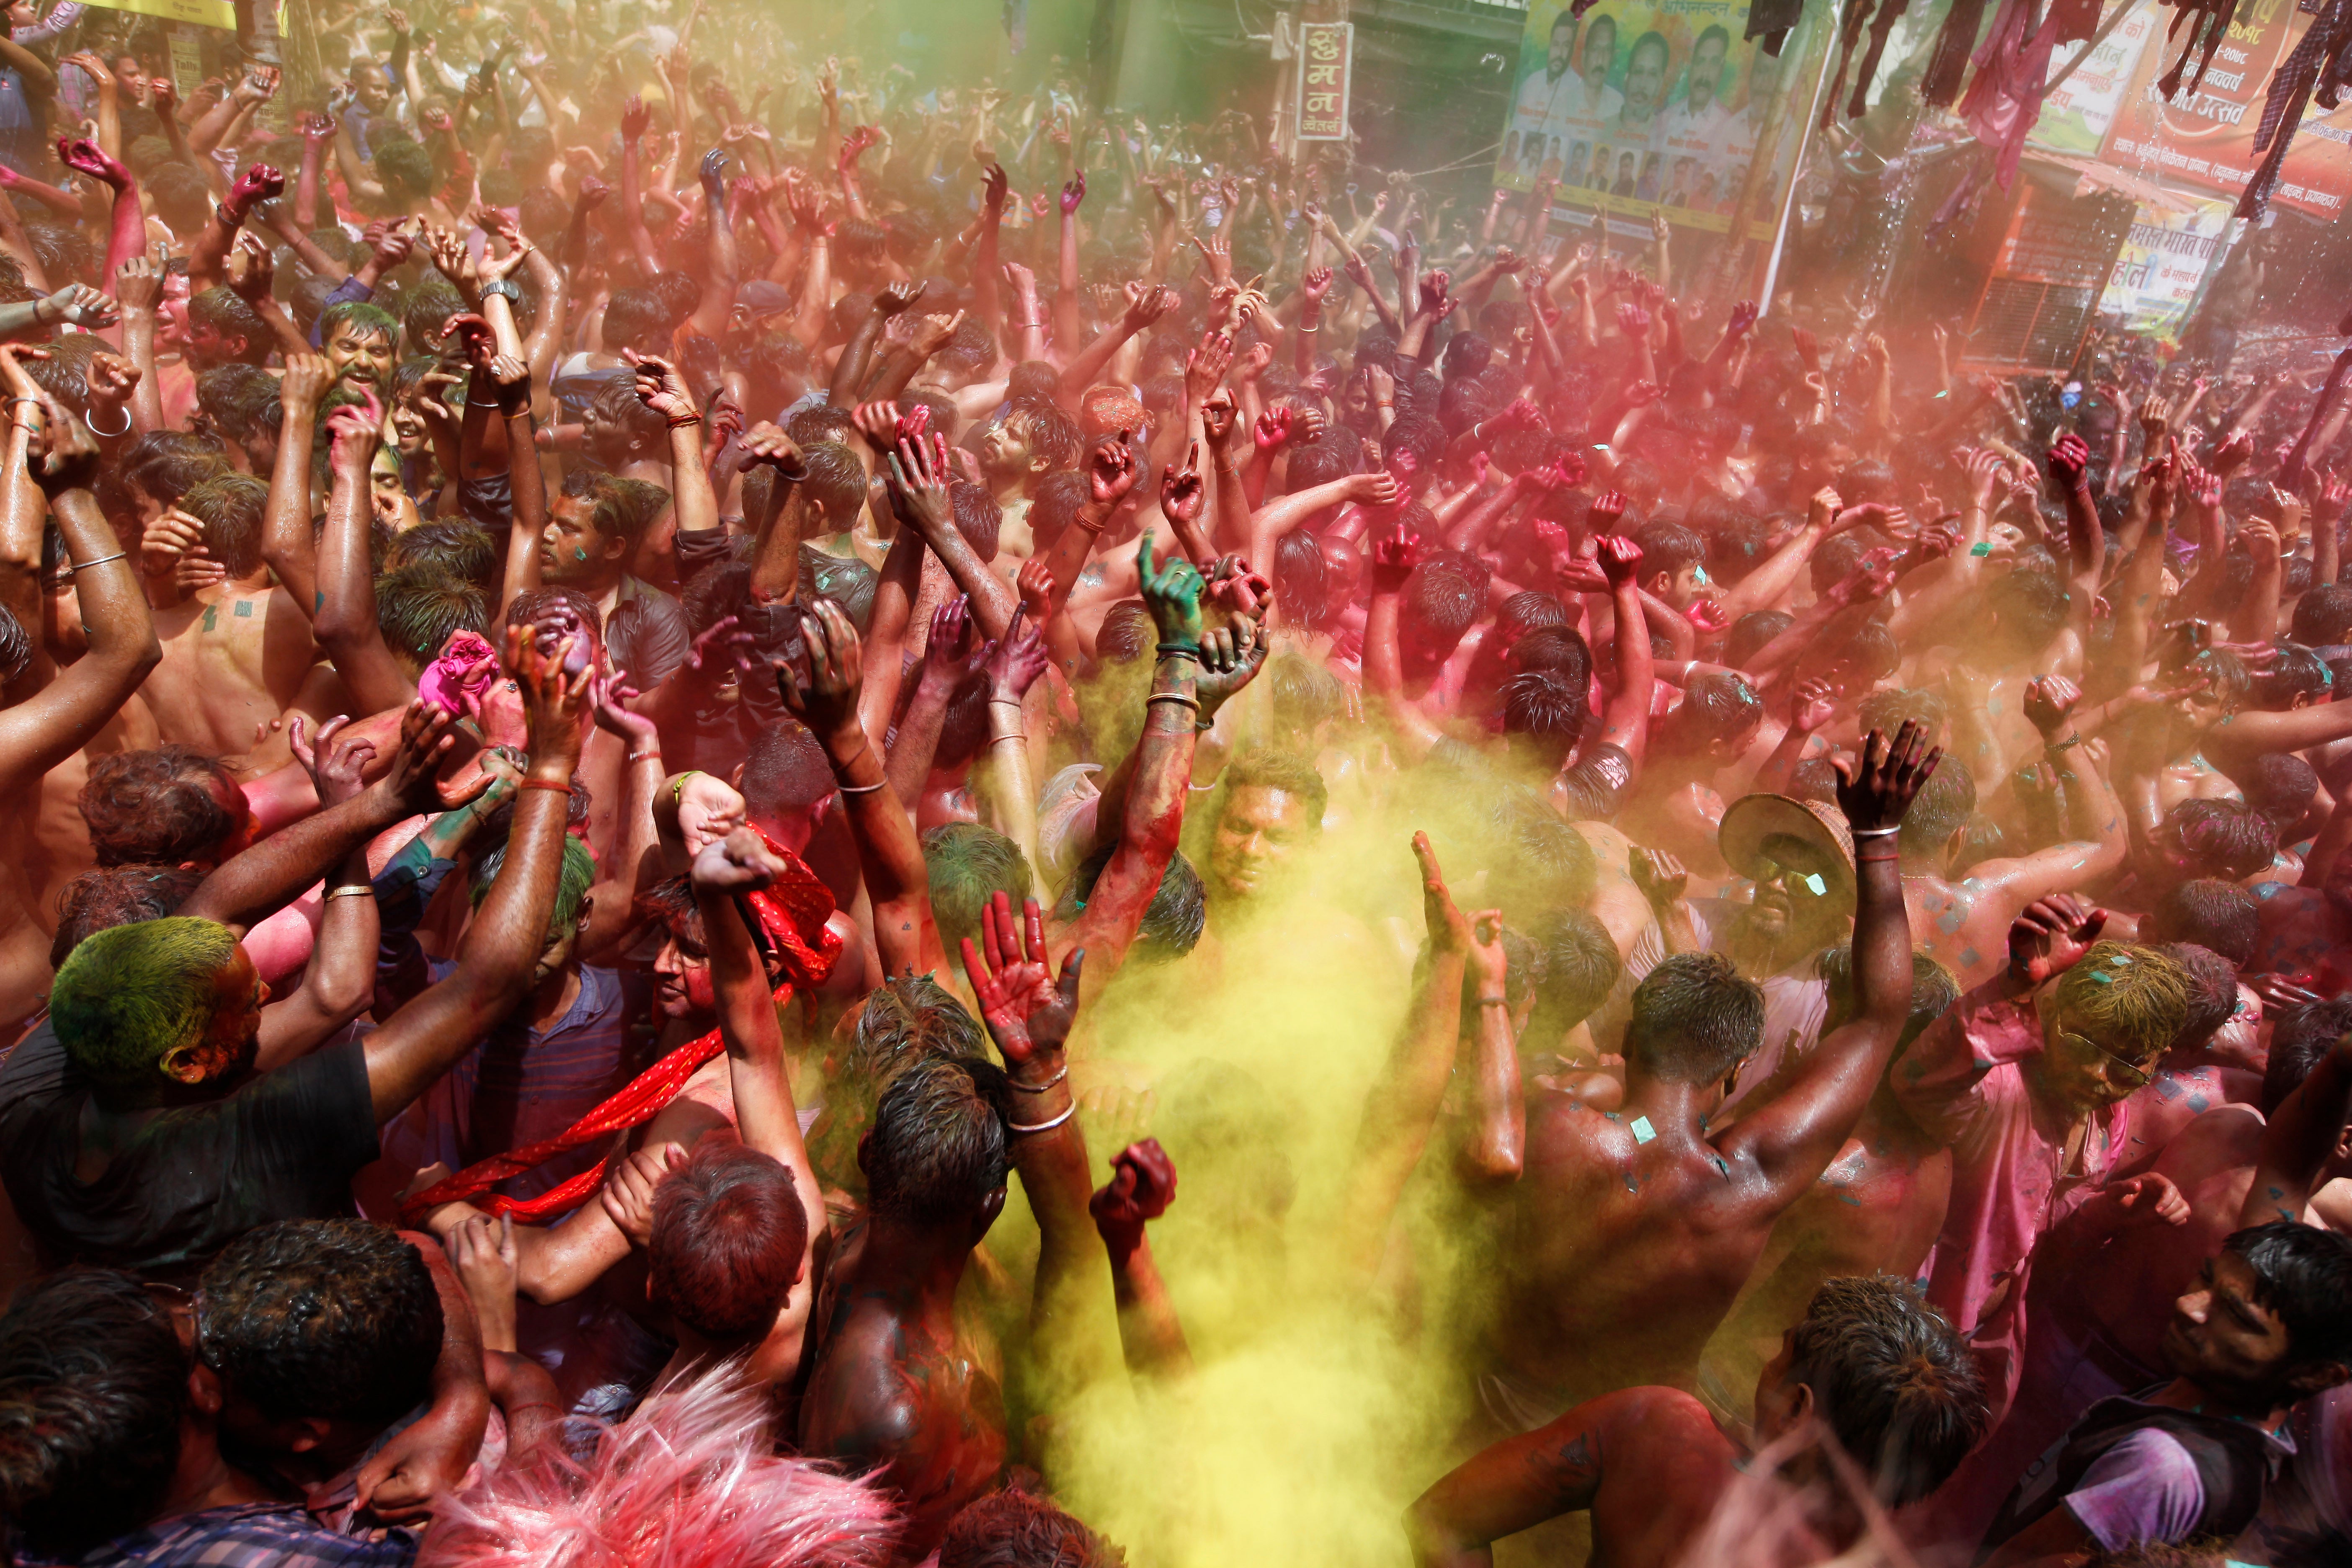 Indian revelers, faces smeared with colored powder, dance during celebrations to mark Holi, the Hindu festival of colors in Prayagraj, India, despite a surge in the virus